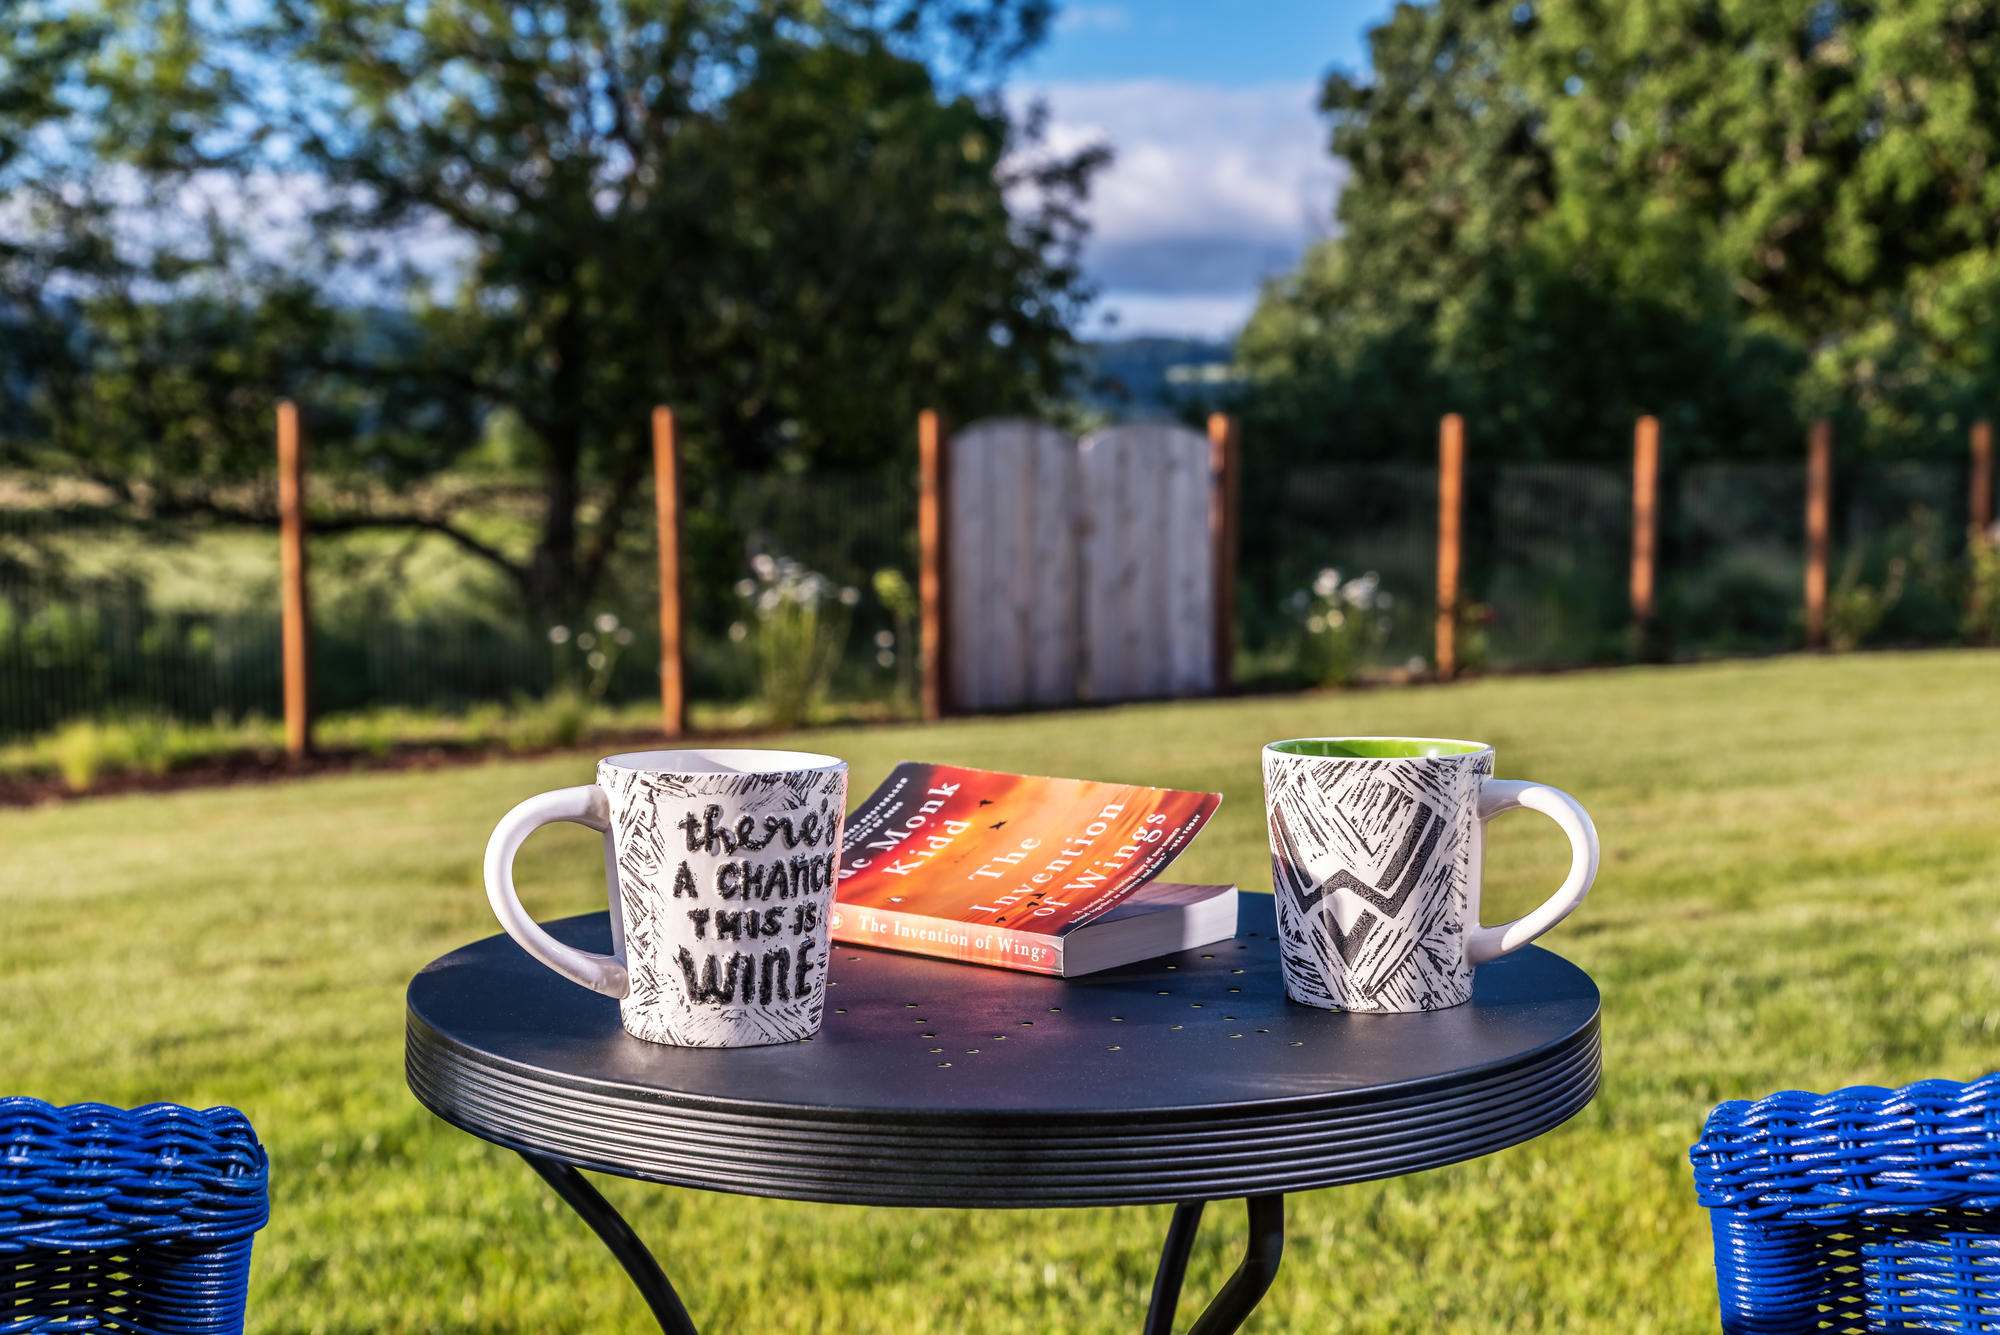 Two coffee mugs on a table with backyard and fence in the background.